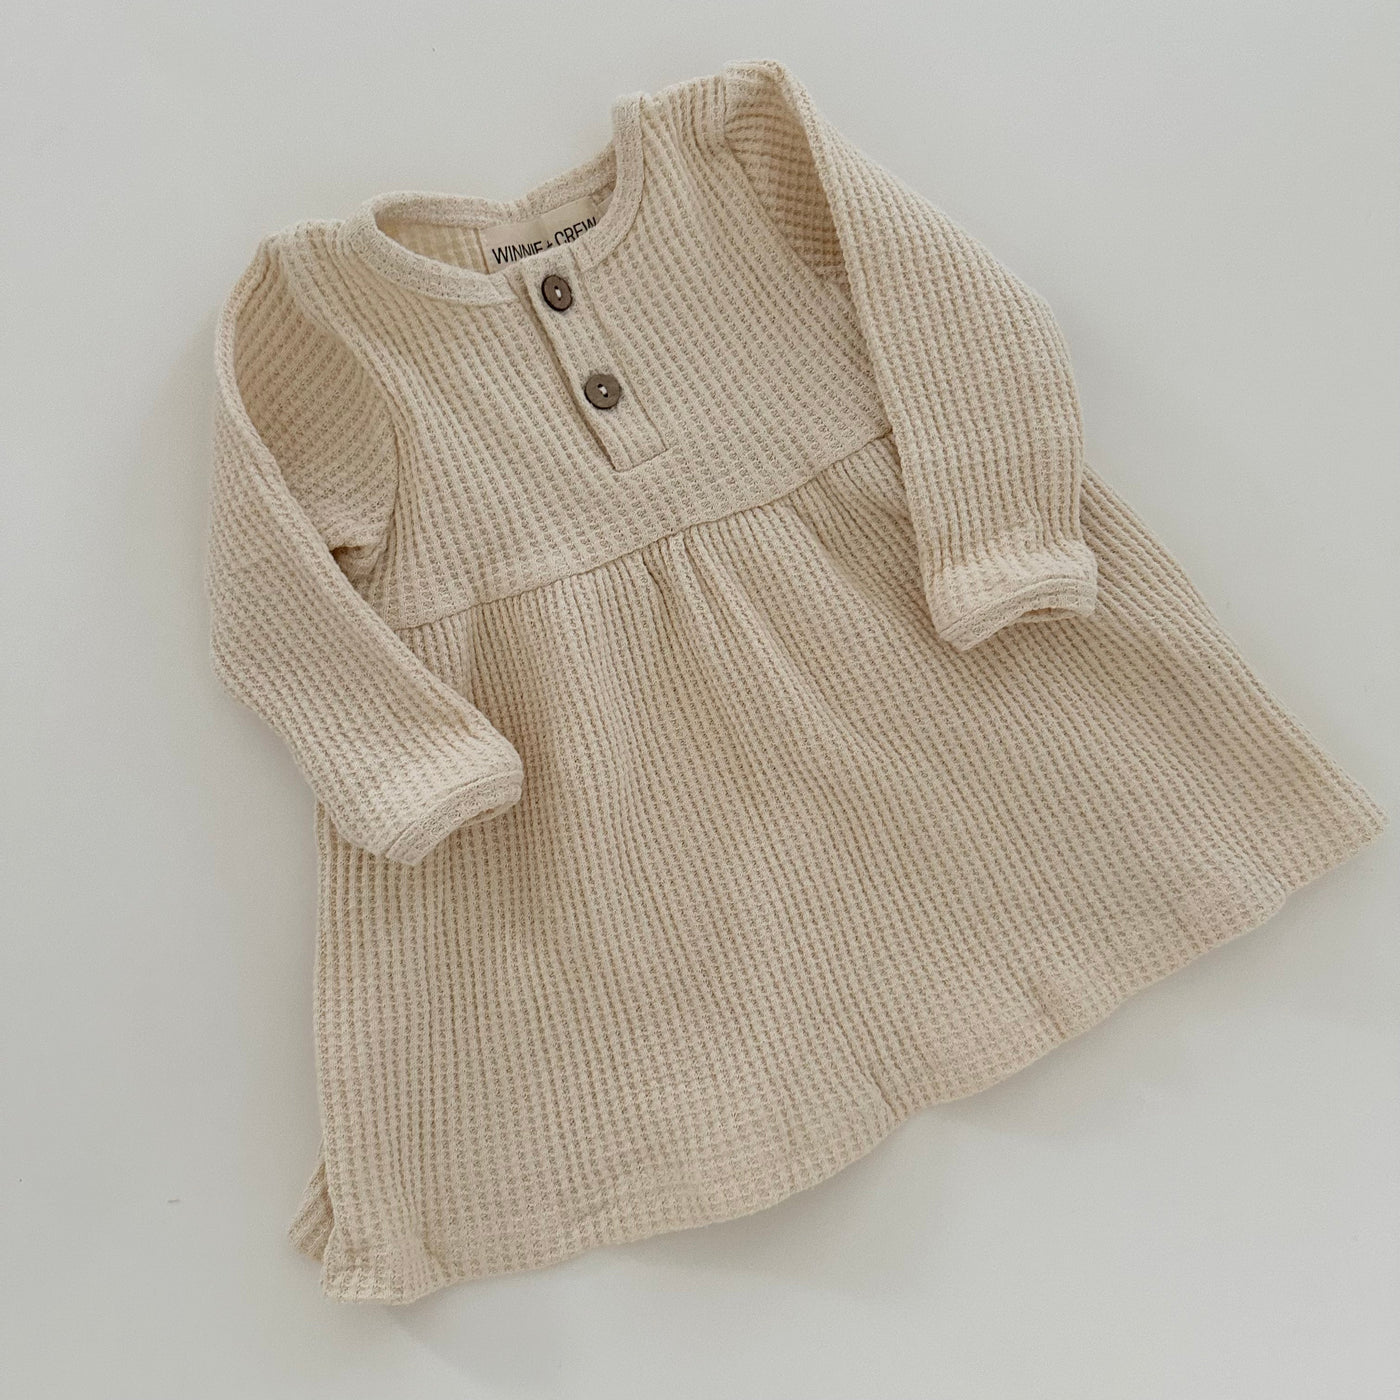 a baby dress on a white background